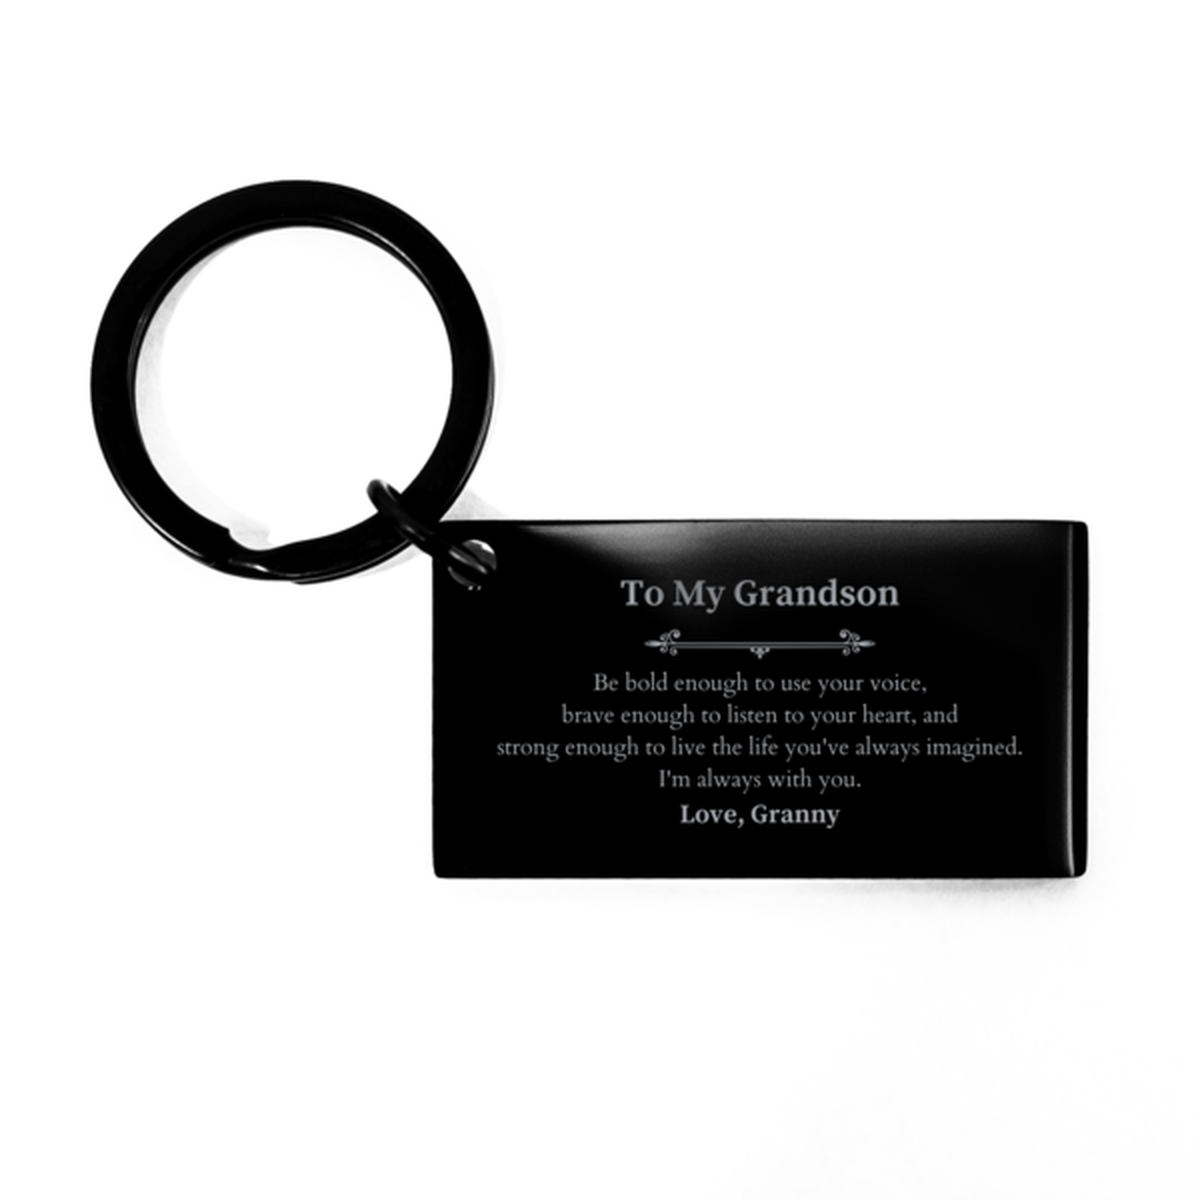 Keepsake Grandson Keychain Gift Idea Graduation Christmas Birthday Grandson from Granny, Grandson Be bold enough to use your voice, brave enough to listen to your heart. Love, Granny